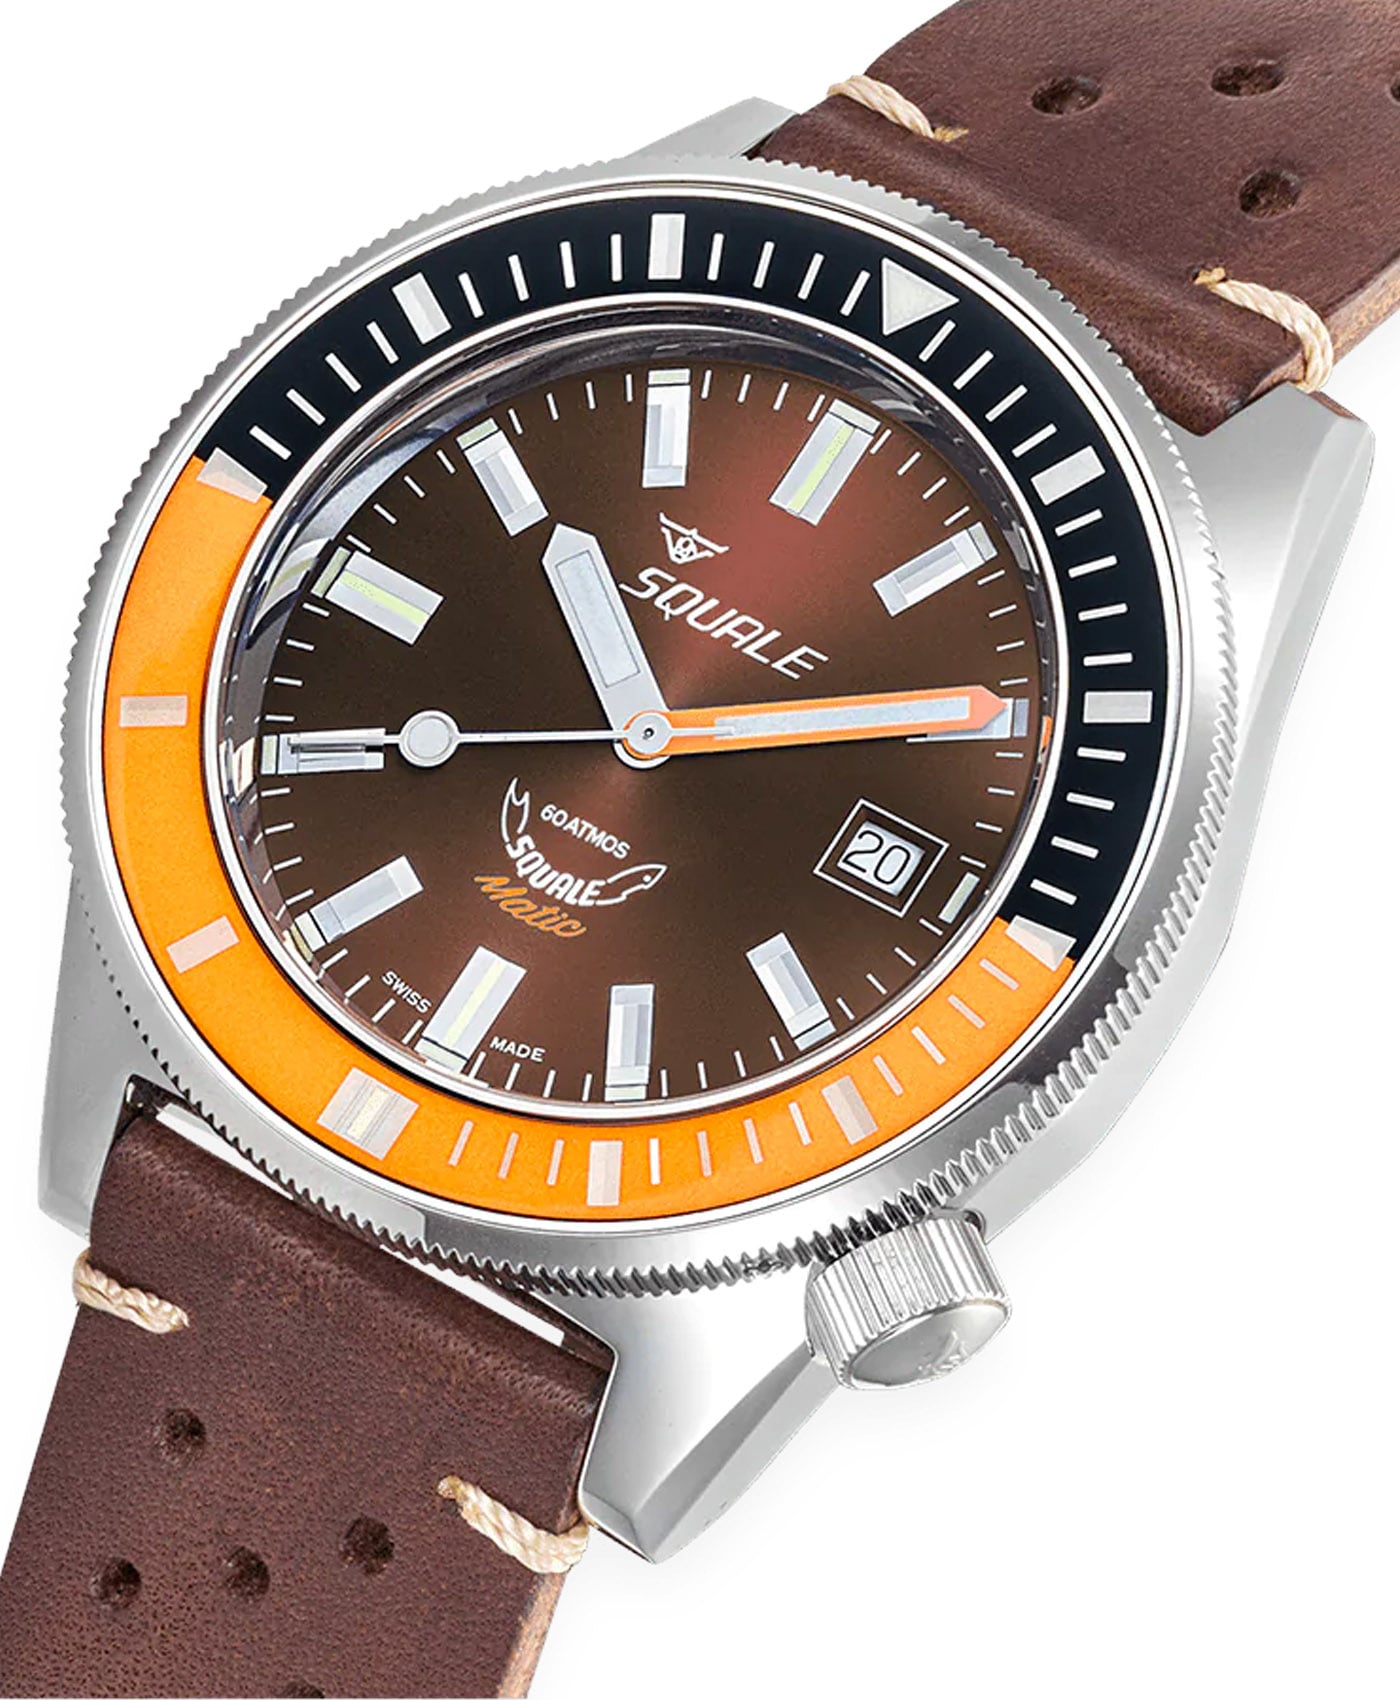 Squale - Matic - Brown - 60 ATM - Leather-close up-min